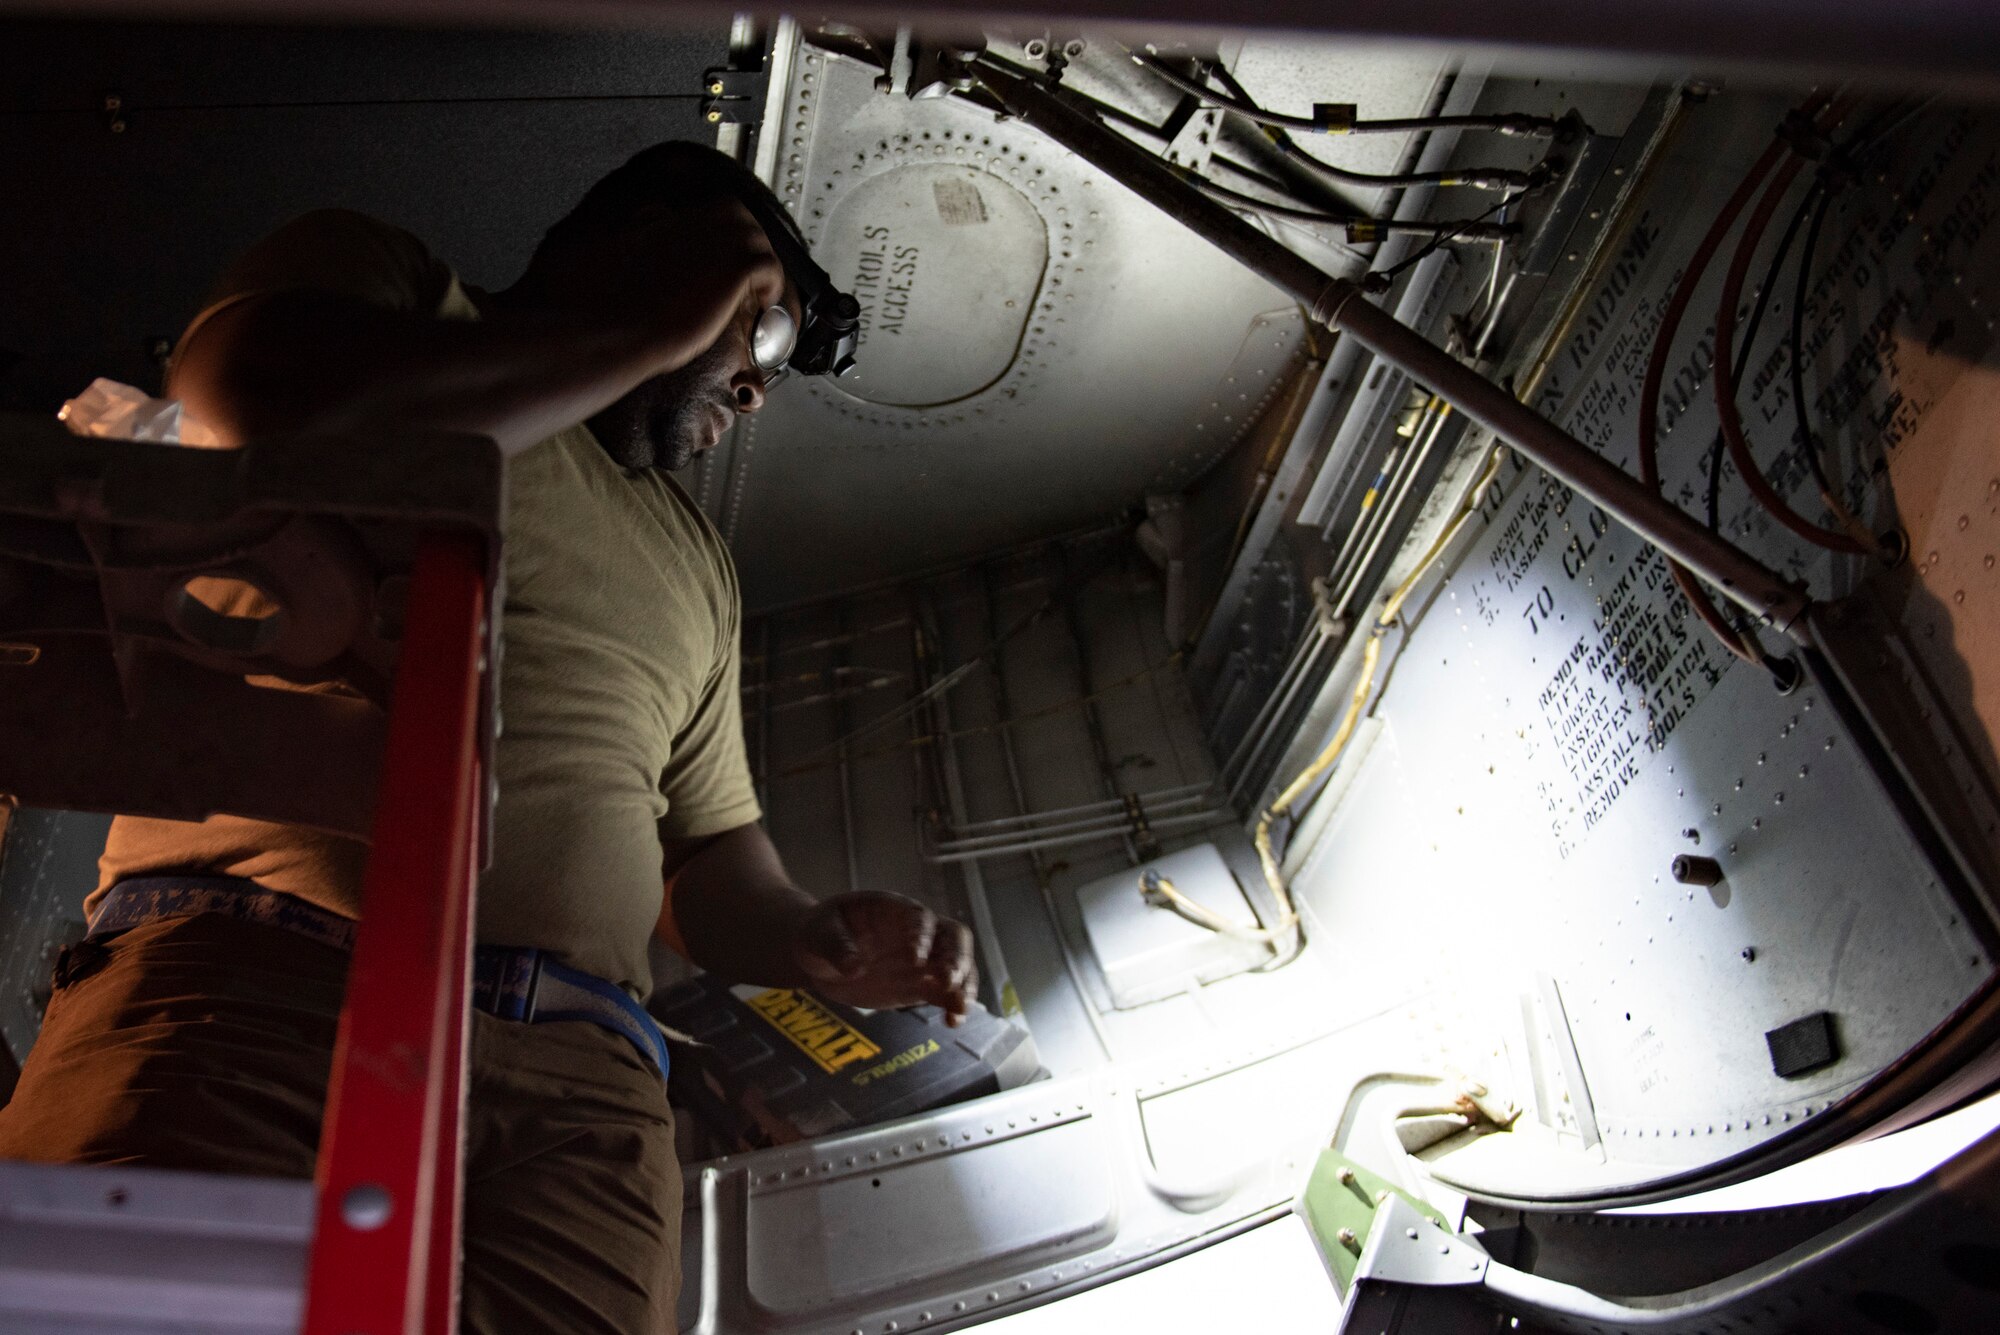 U.S. Air Force Tech. Sgt. Alexander Campbell, an aircraft mechanic assigned to the 386th Expeditionary Aircraft Maintenance Squadron and deployed from Dover Air Force Base, Delaware, works inside a gear panel of a C-130 Hercules at Ali Al Salem Air Base, Kuwait, July 20, 2021. The EAMXS works 24-hour operations year-round to keep the C-130 Hercules’ in flight to accomplish the mission of fight to win today and to provide warfighter support in the area of responsibility. (U.S. Air Force Photo by Senior Airman Helena Owens)